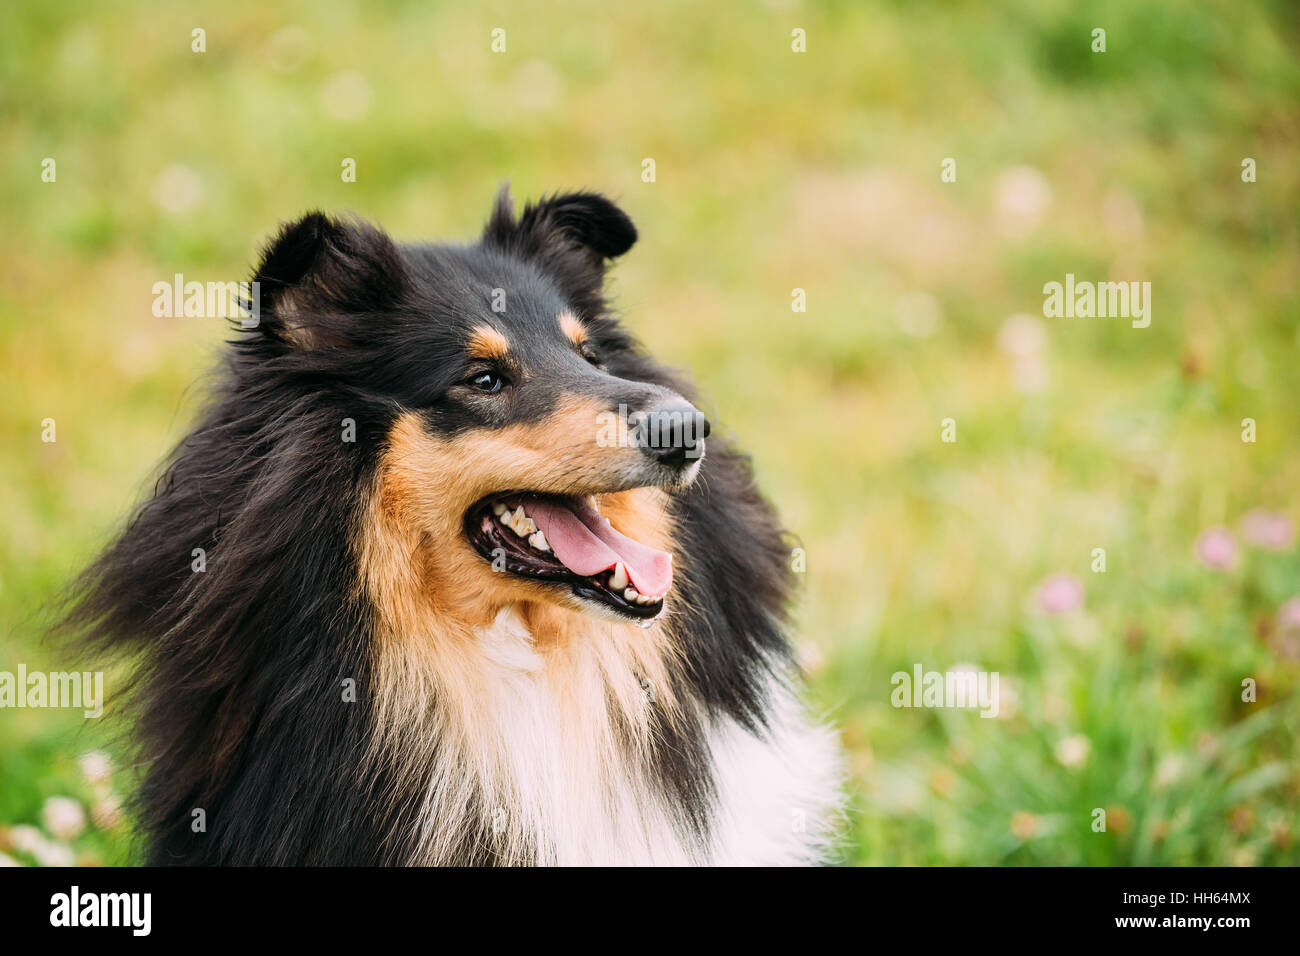 The Close Portrait Of Staring Tricolor Rough Collie, Scottish Collie, Long-Haired Collie, English Collie, Lassie Adult Dog With Ajar Jaws, Tongue. Stock Photo